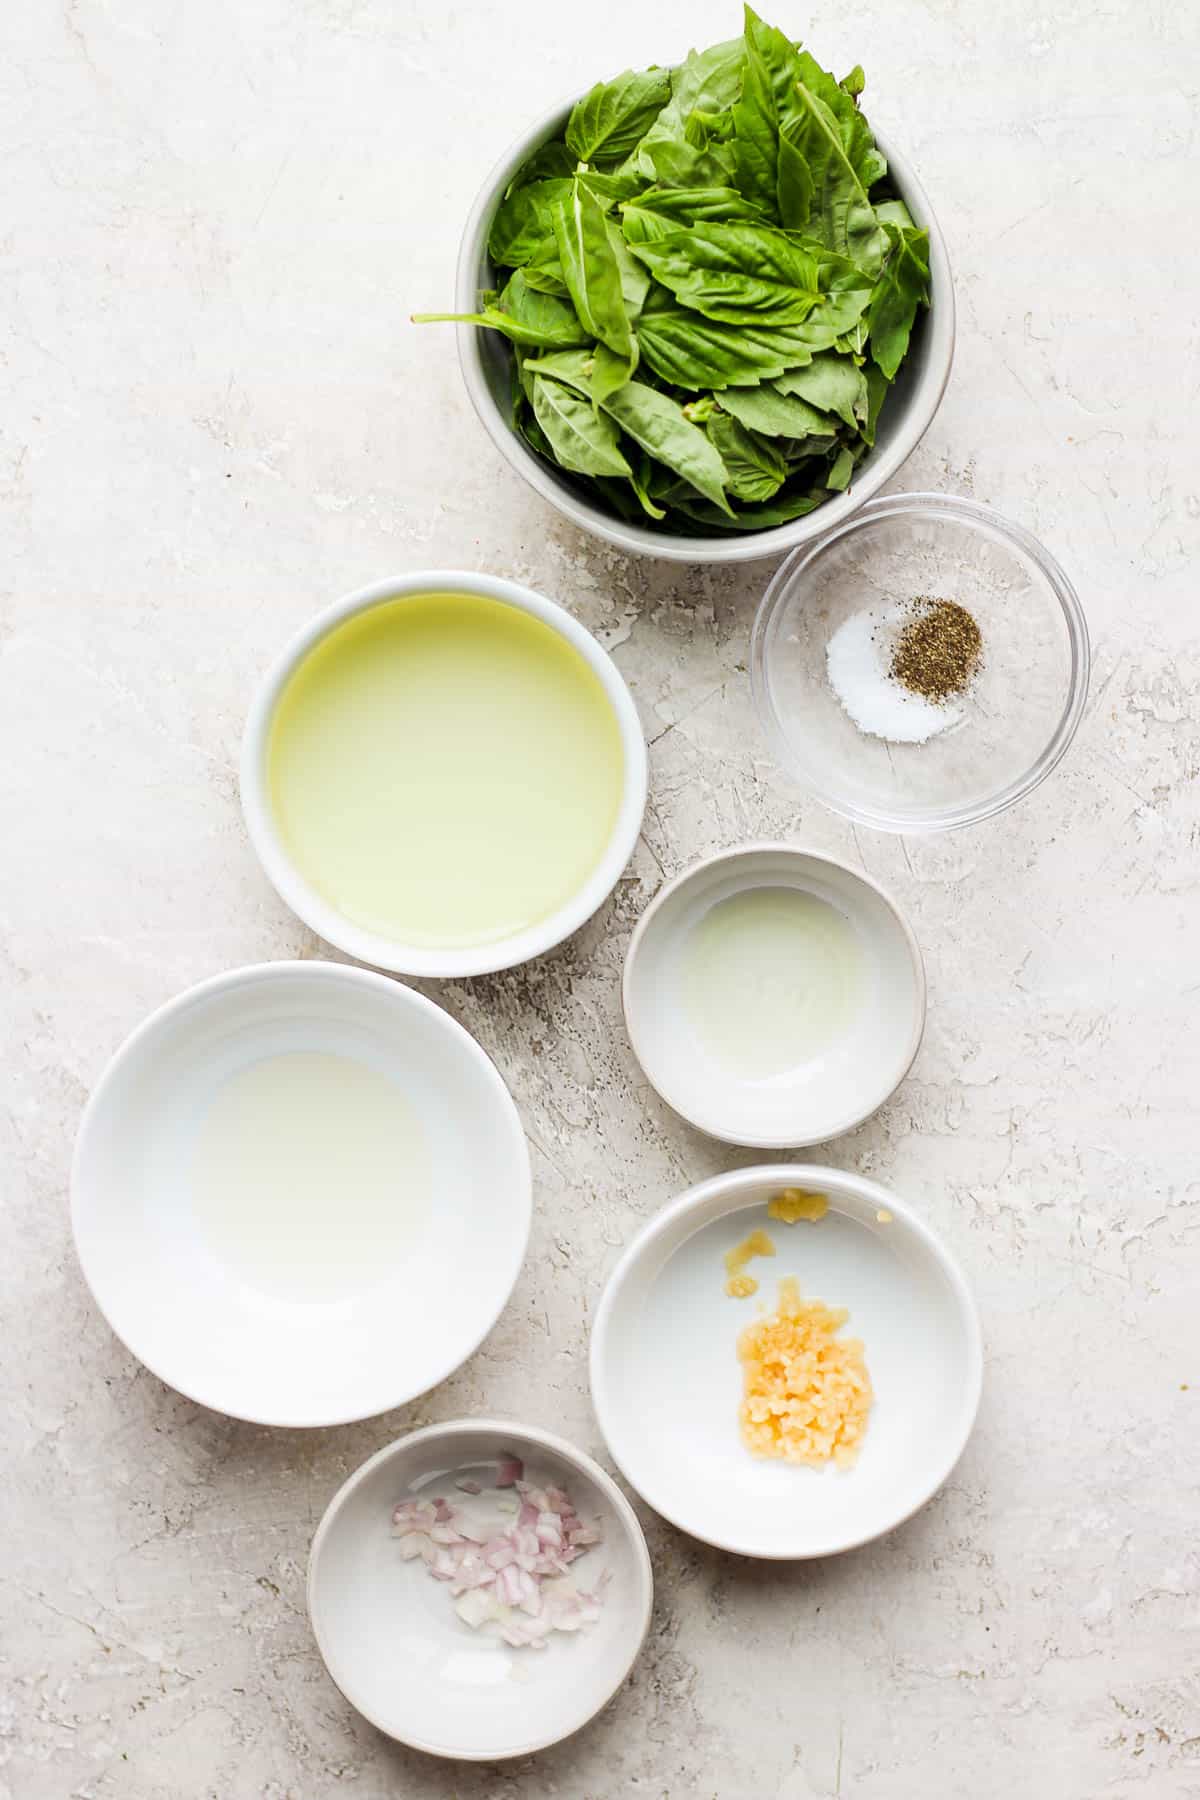 Ingredients for a basil vinaigrette in separate bowls.